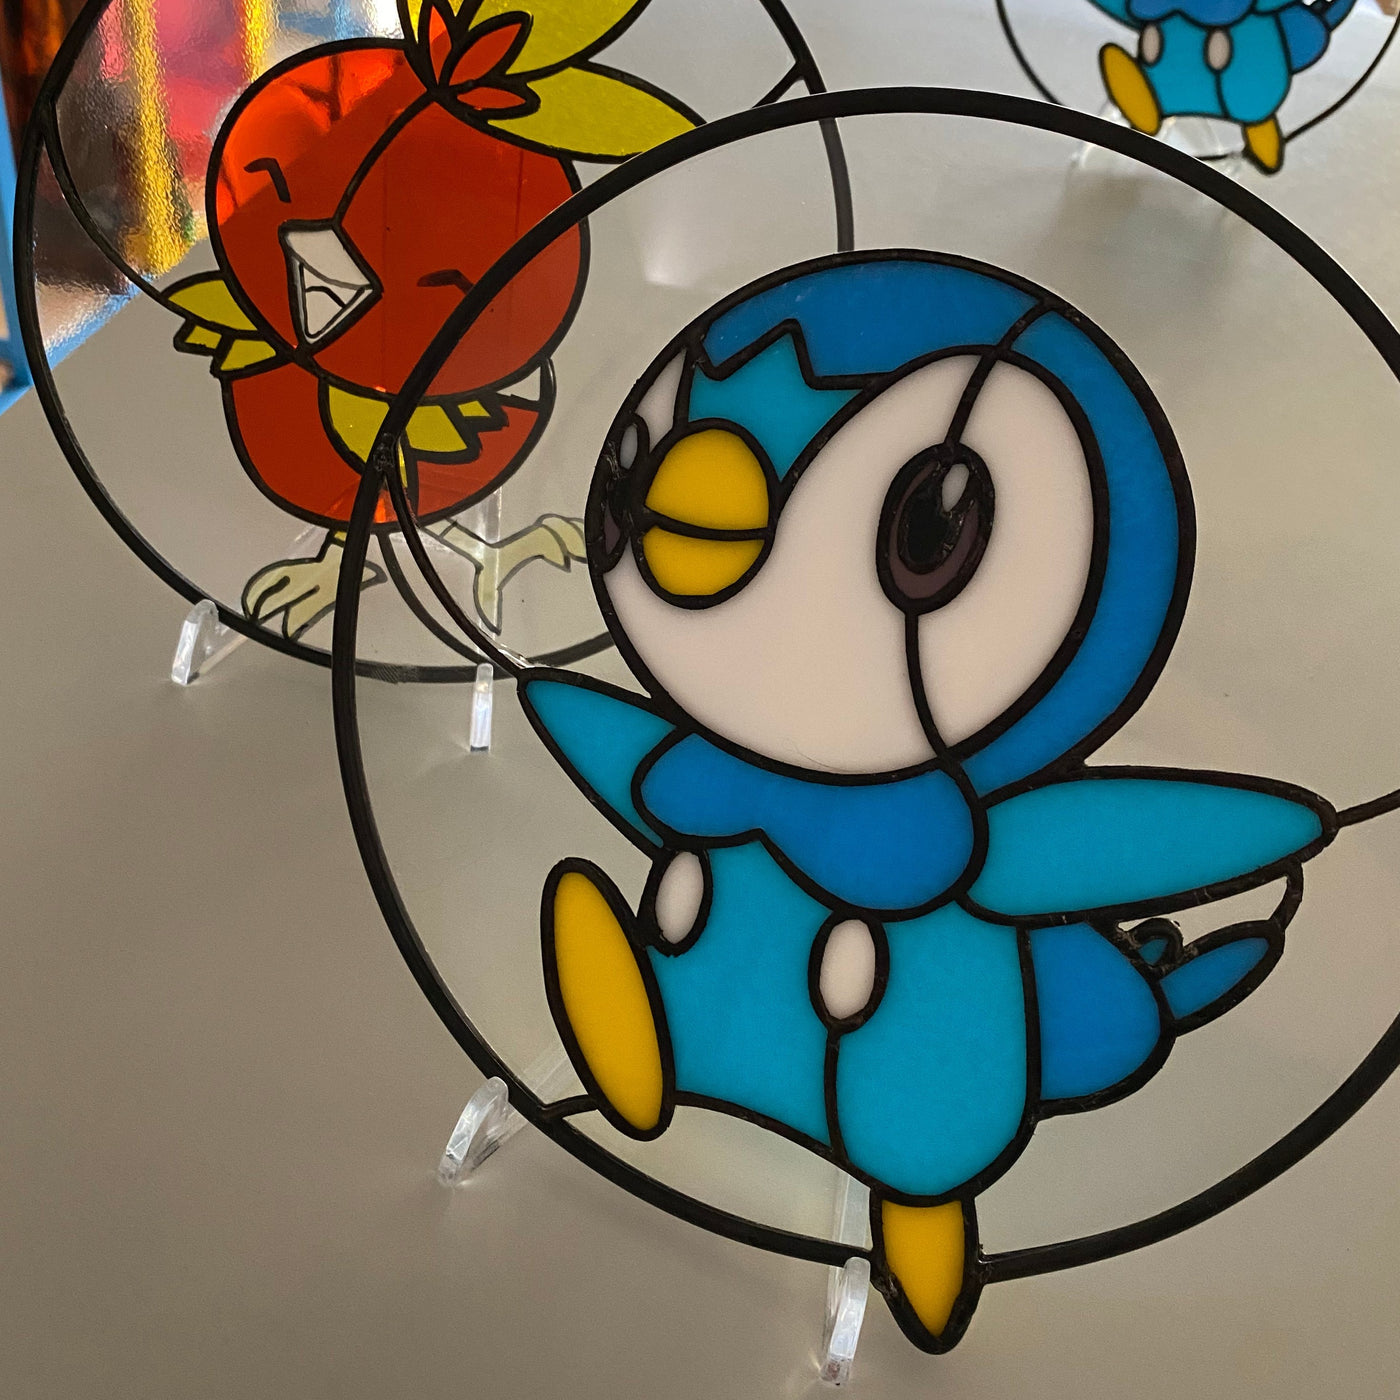 Piplup Inspired Stained Glass Art